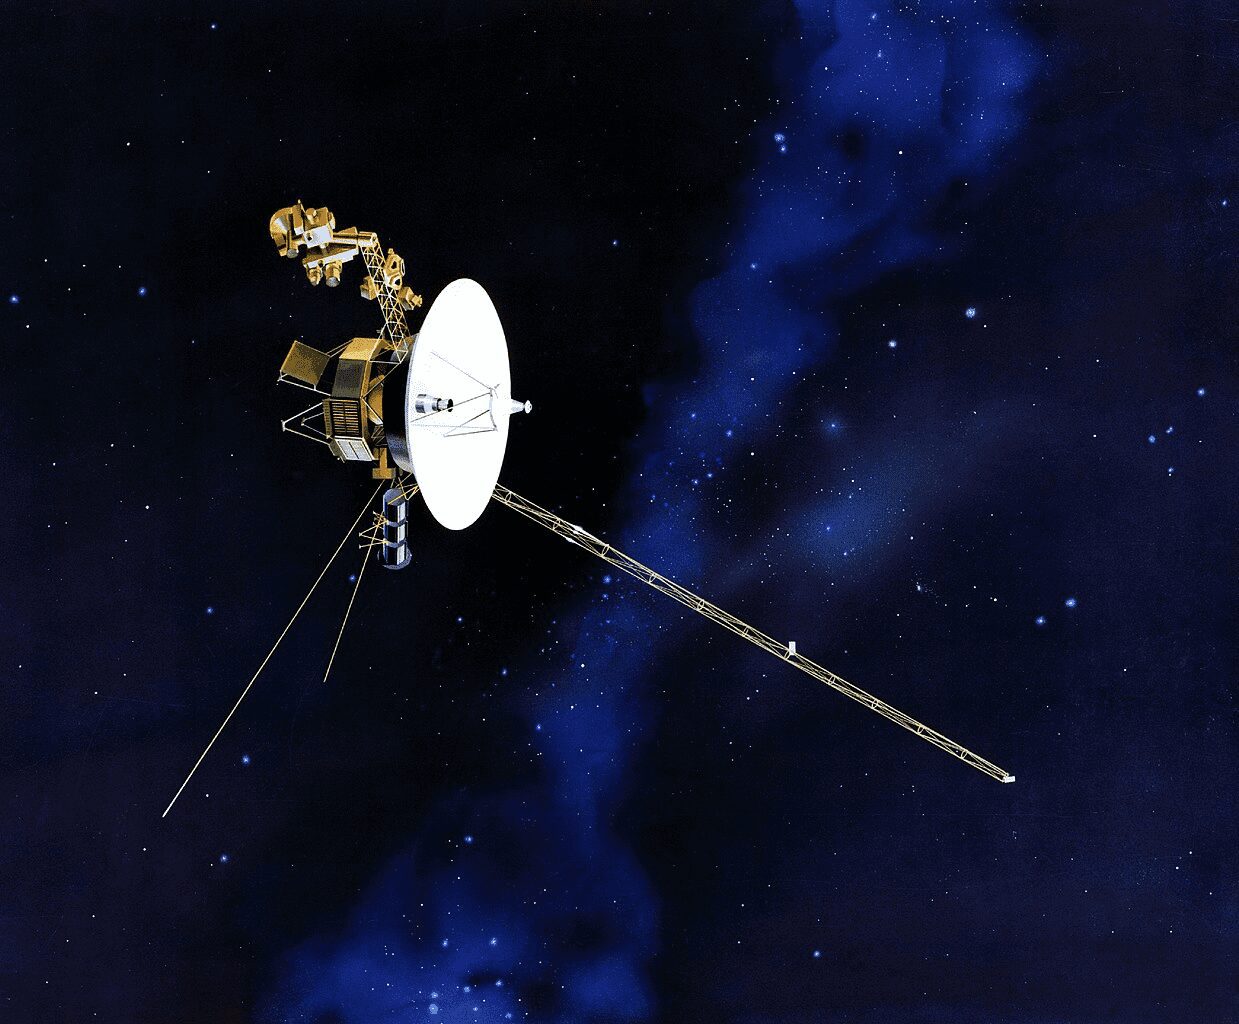 Artist's concept of a Voyager spacecraft flying through the universe.